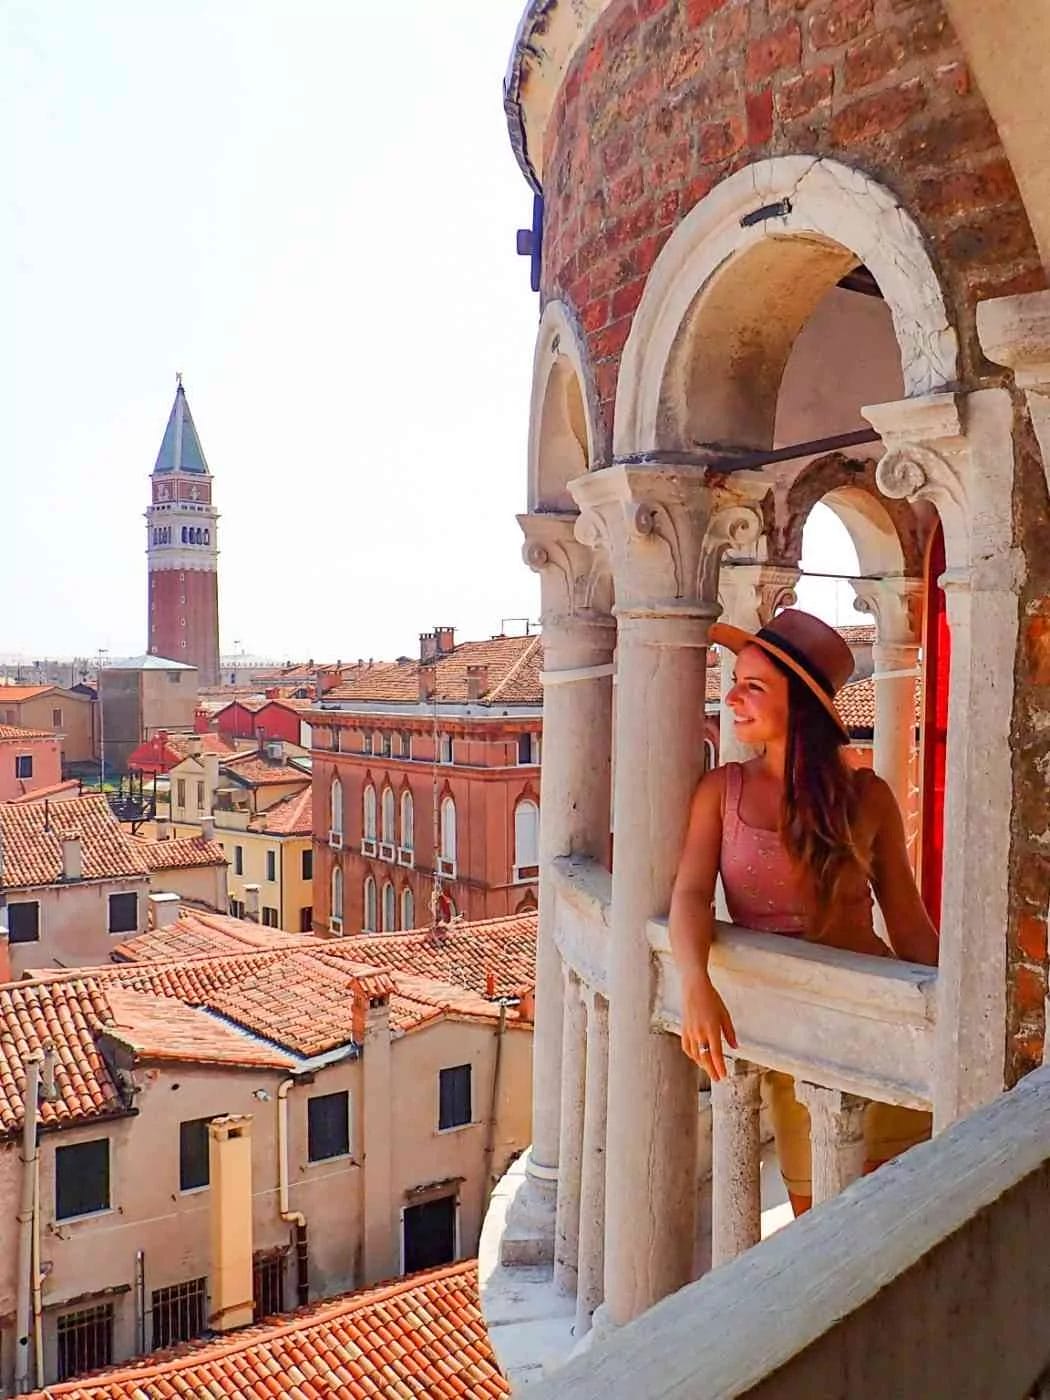 lady at Scala Contarini del Bovolo in the tower looking out onto the venetian skyline